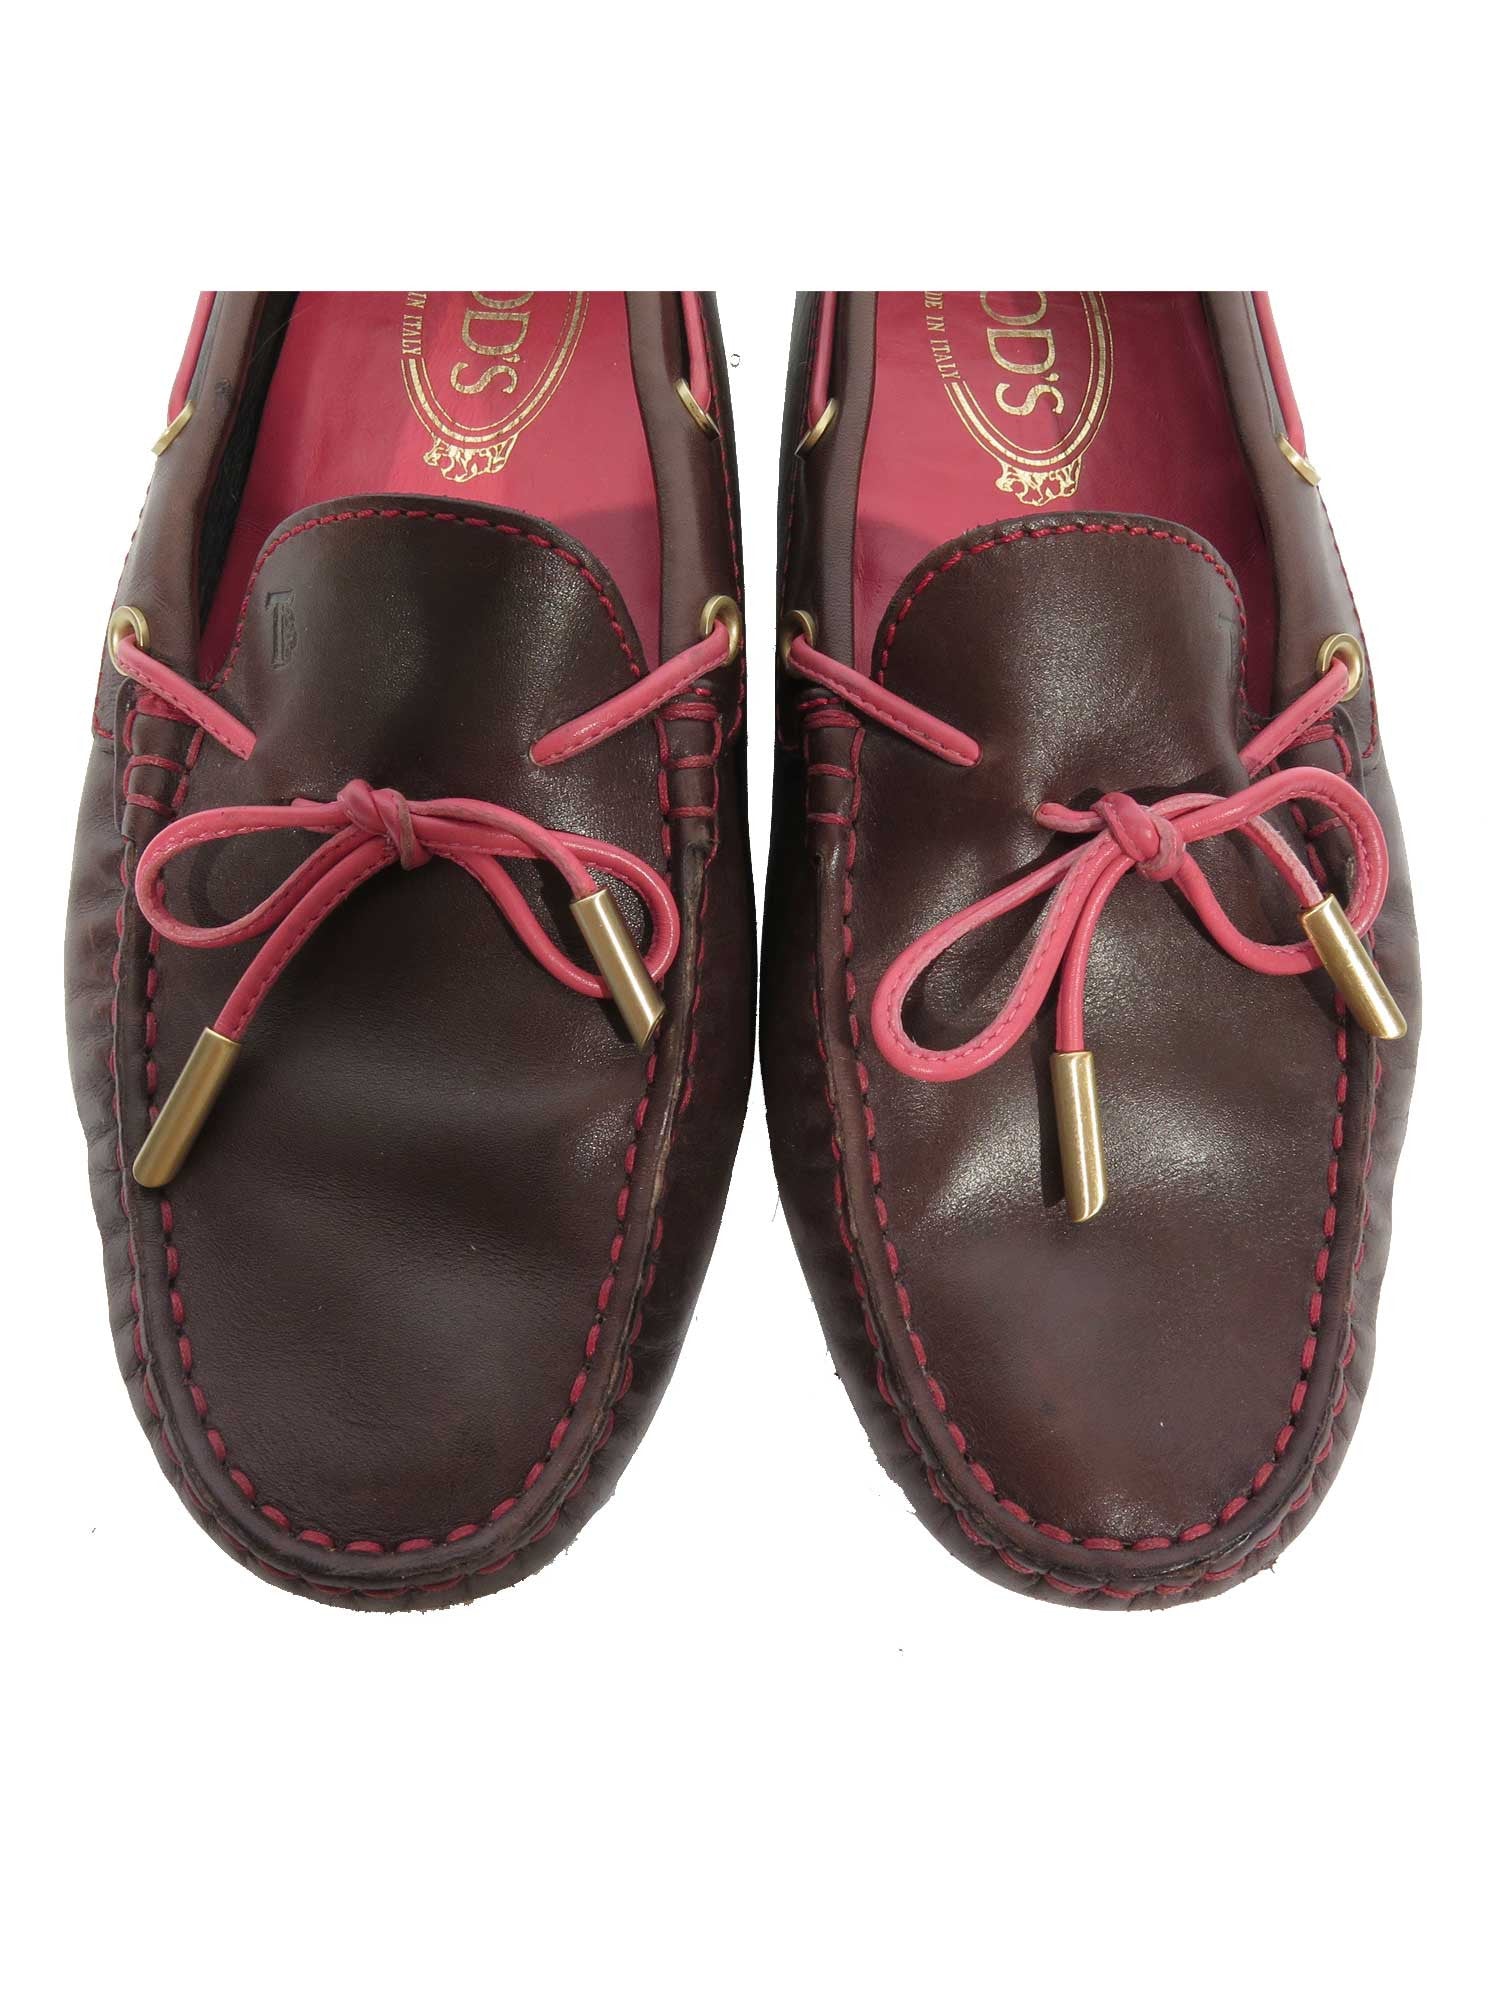 Pre-owned Tod's Gommino Driving Leather Loafers | Sabrina's Closet